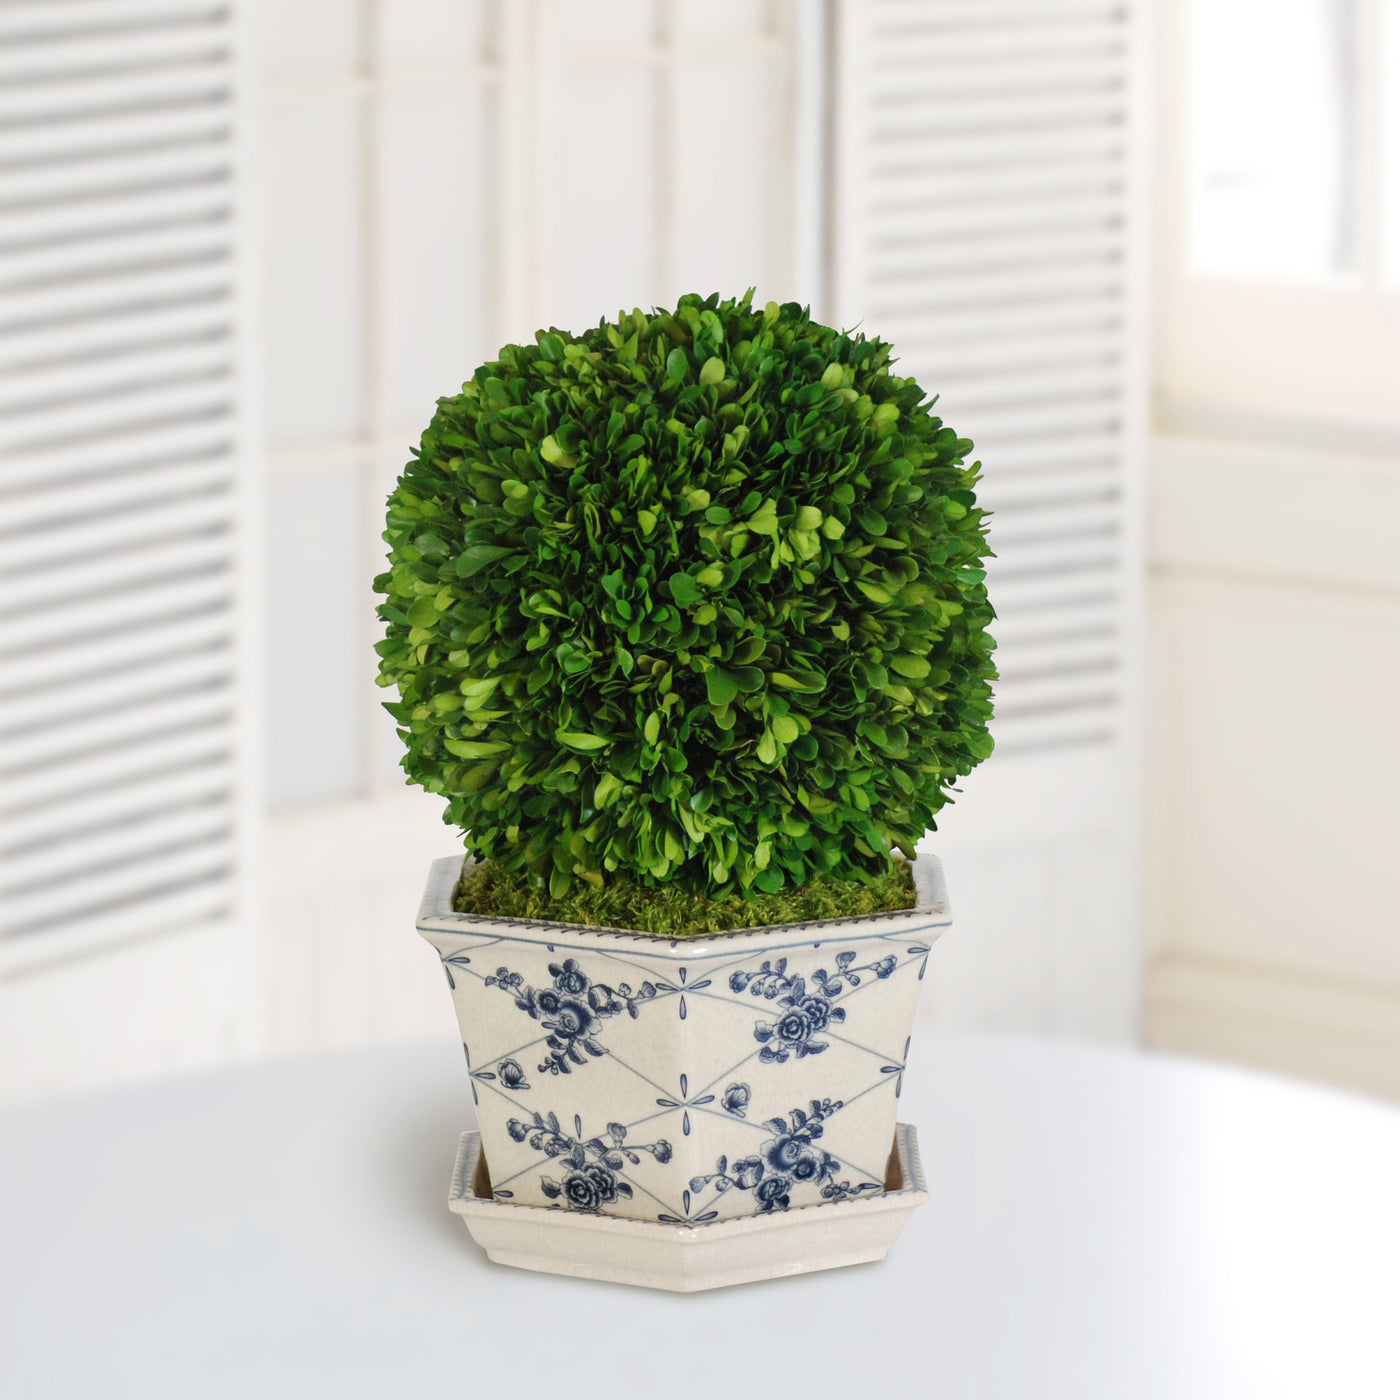 BOXWOOD BALL IN POT CACHE (WHD096.GR) - Winward Home faux floral arrangements